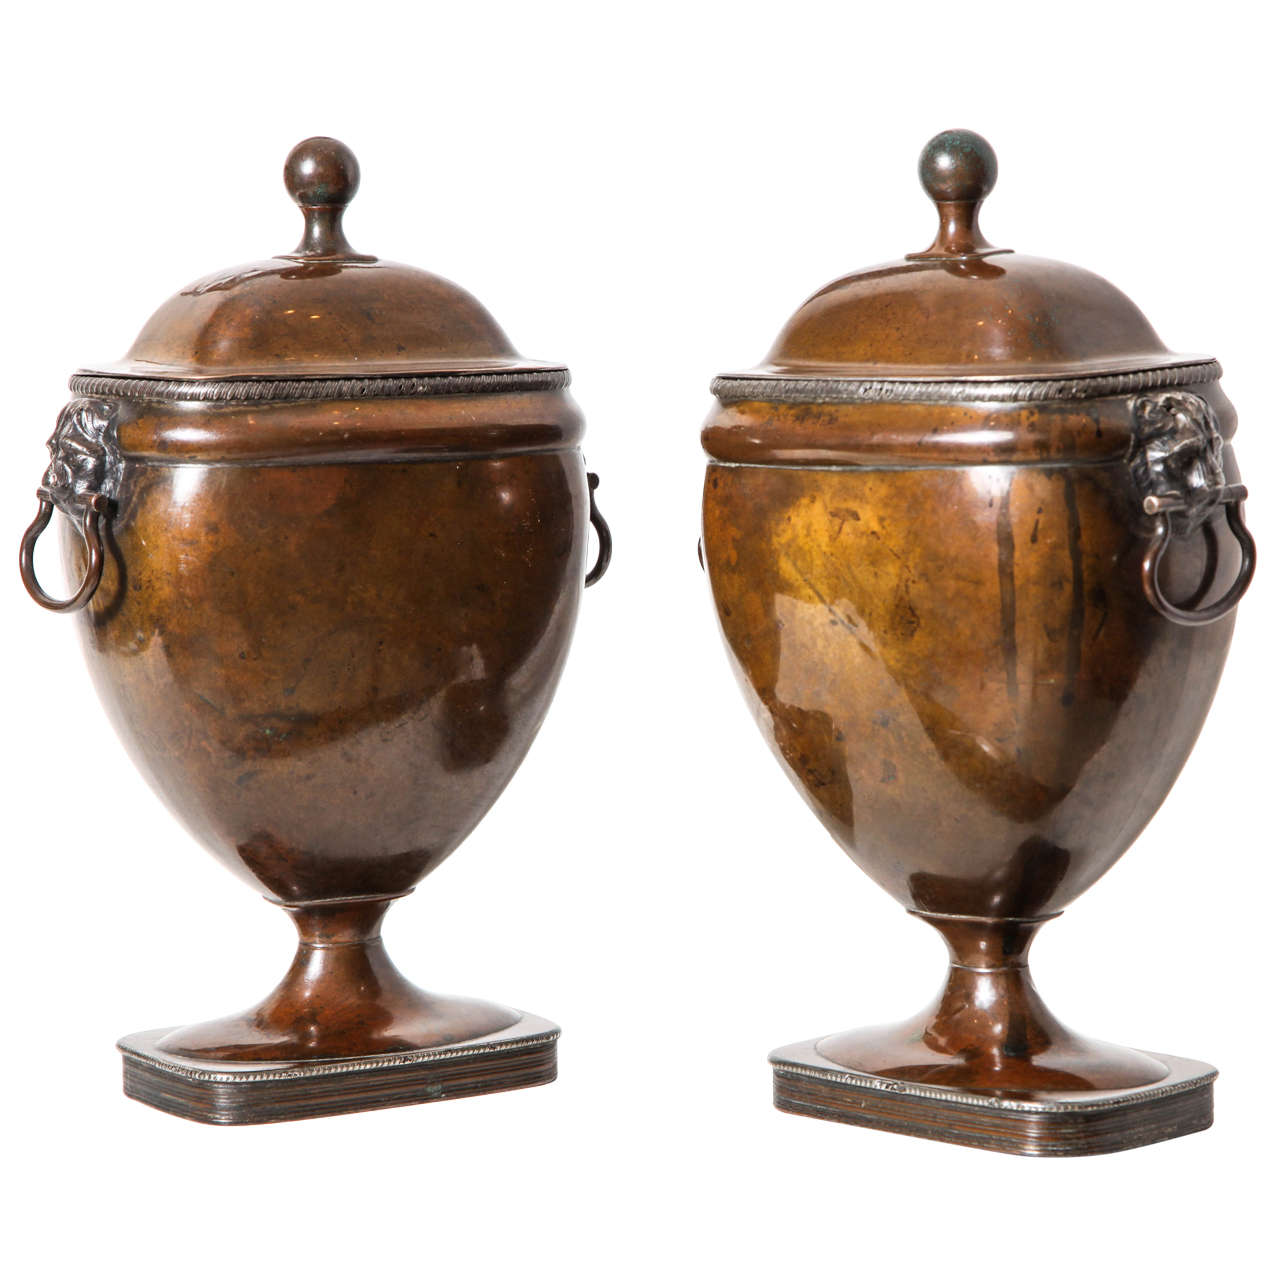 A Pair of 19th century English silvered copper covered urns